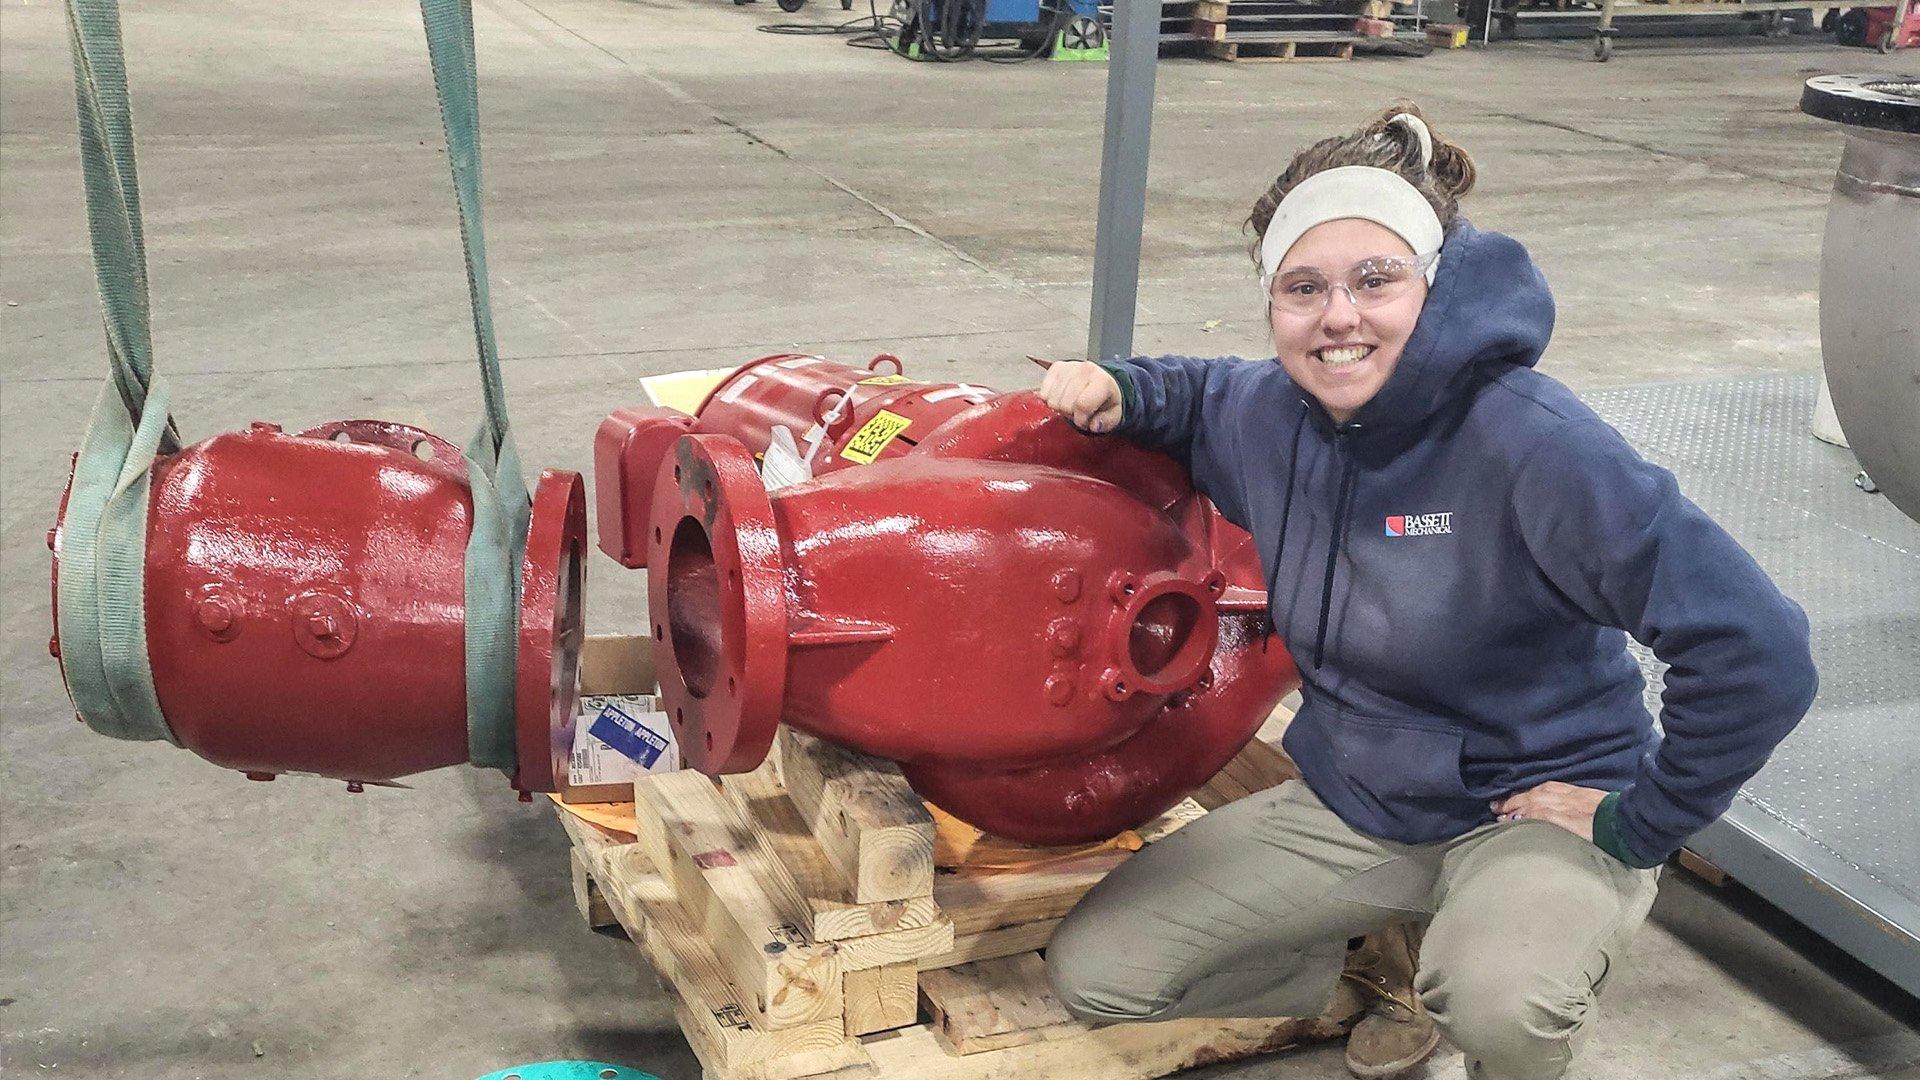 Grace T smiles next to red underground pipe connectors in a warehouse facility.